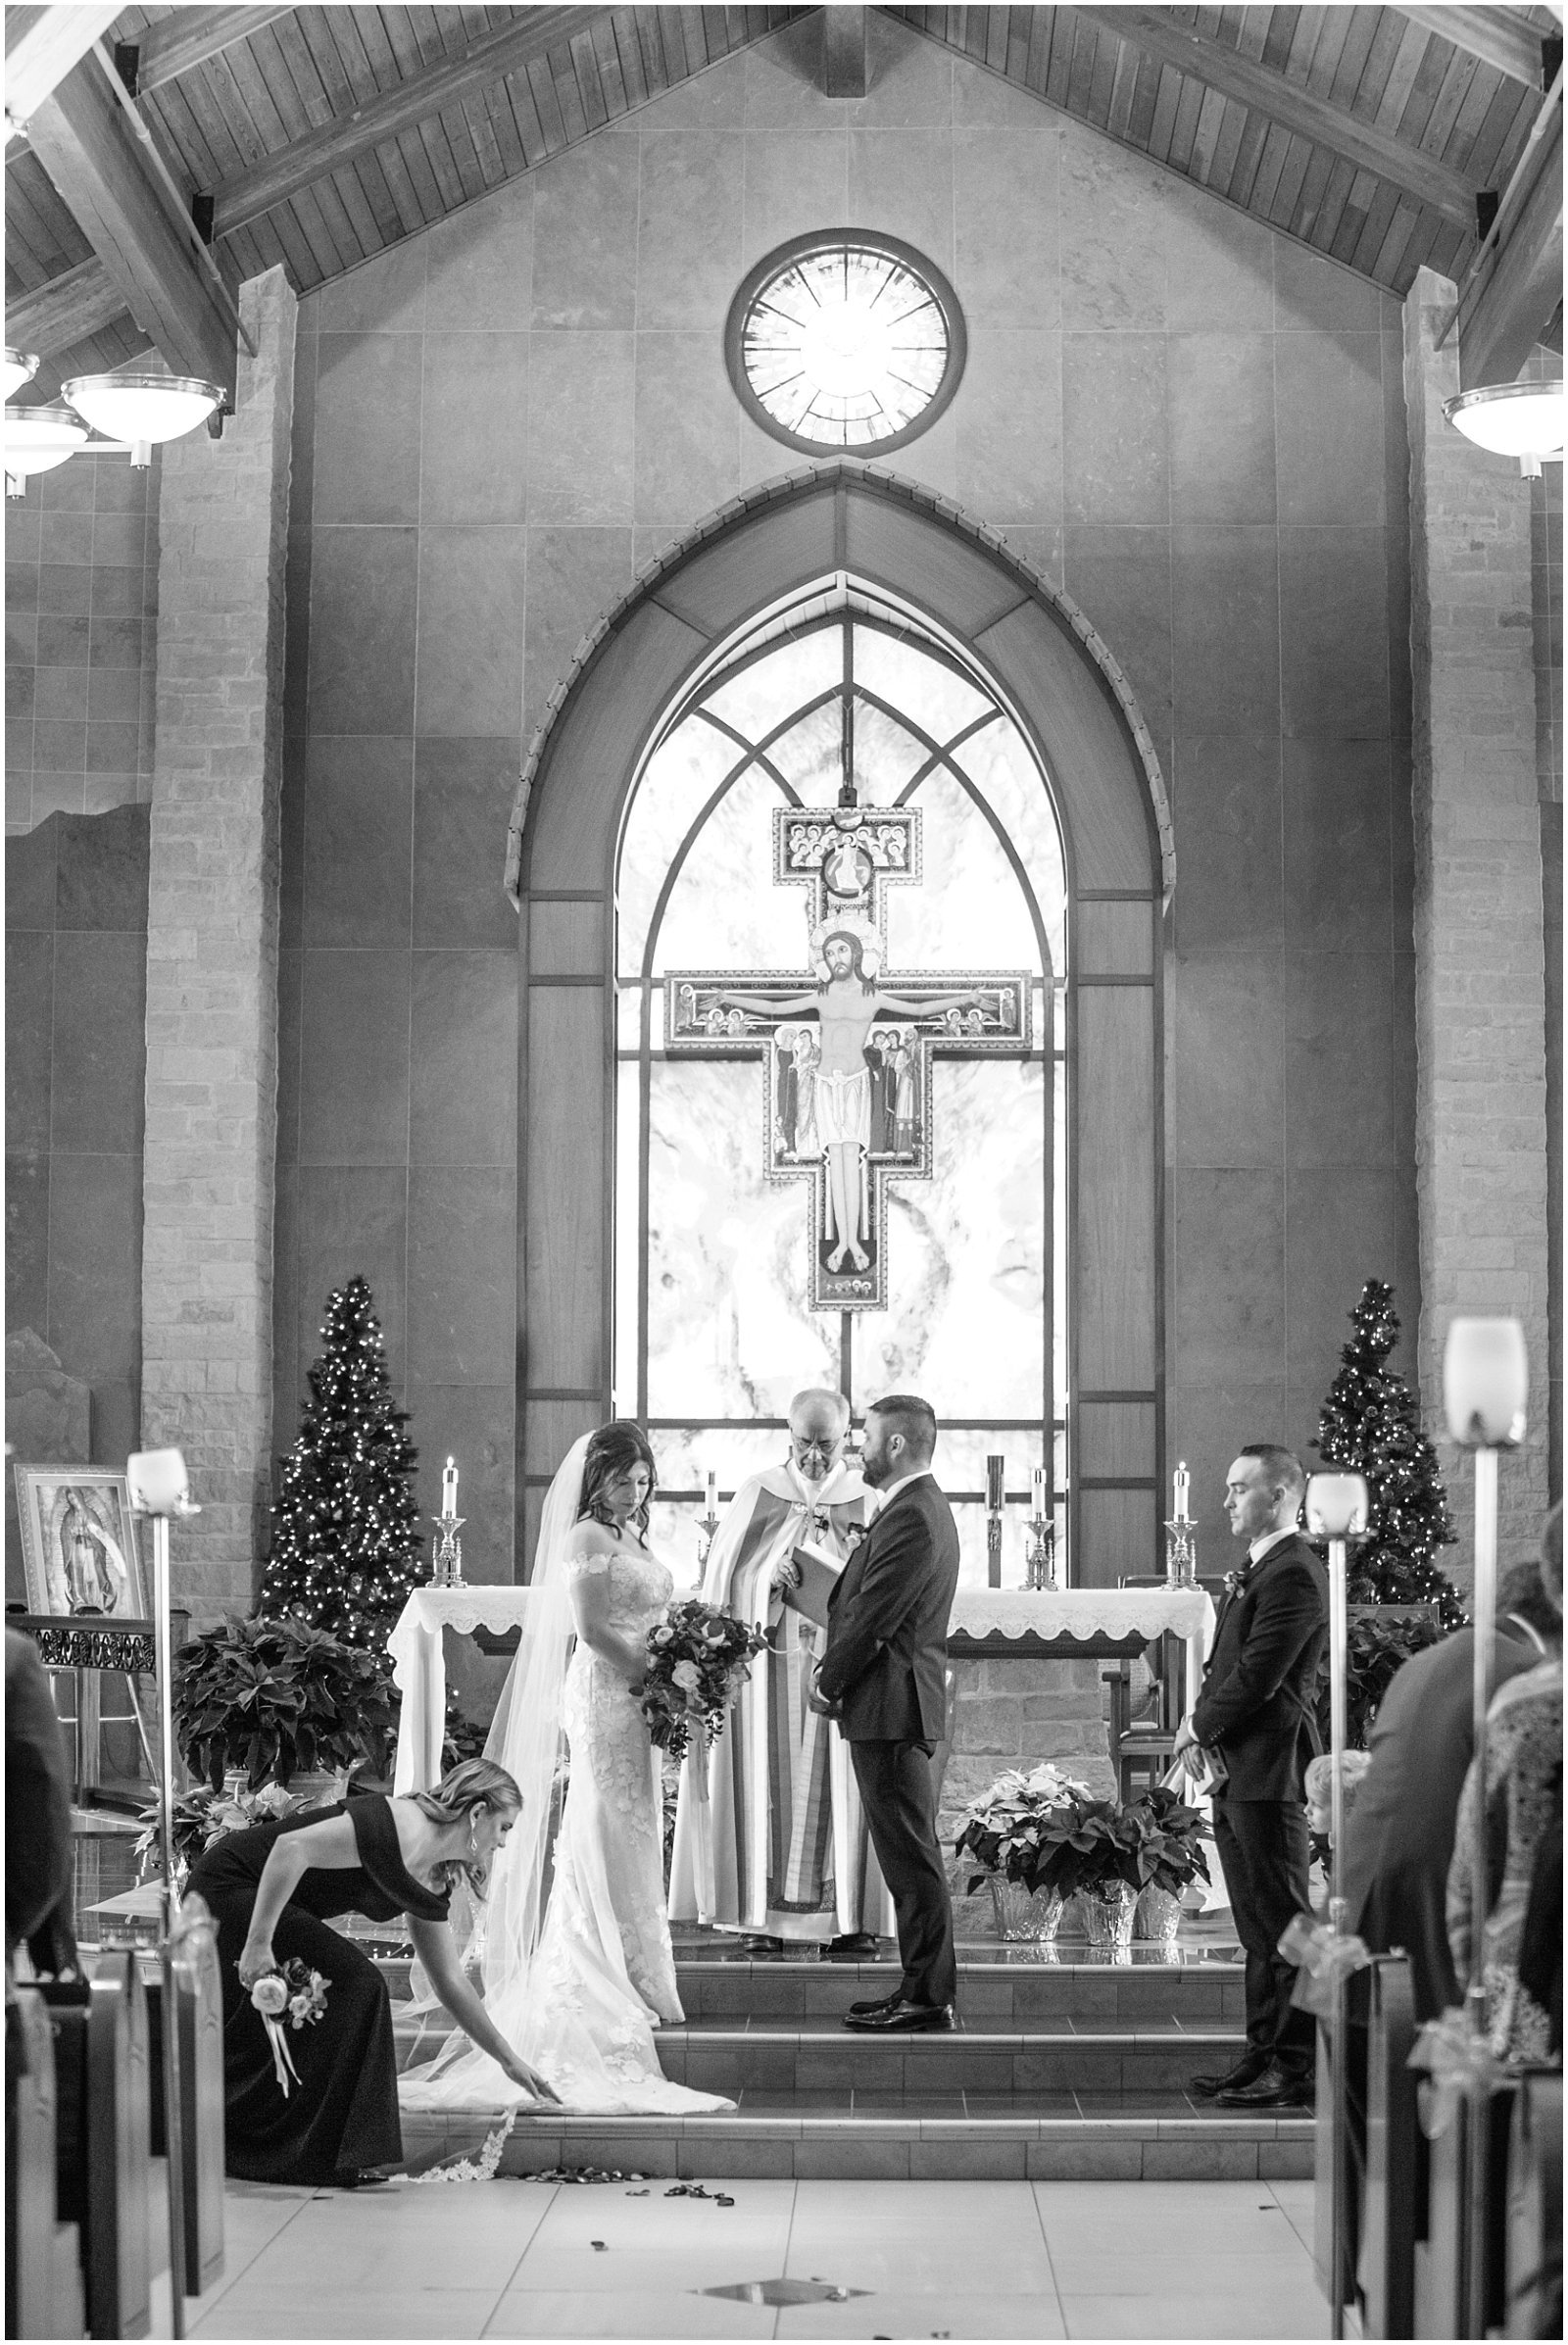 Winter wedding ceremony at St Francis of Assisi Catholic Church